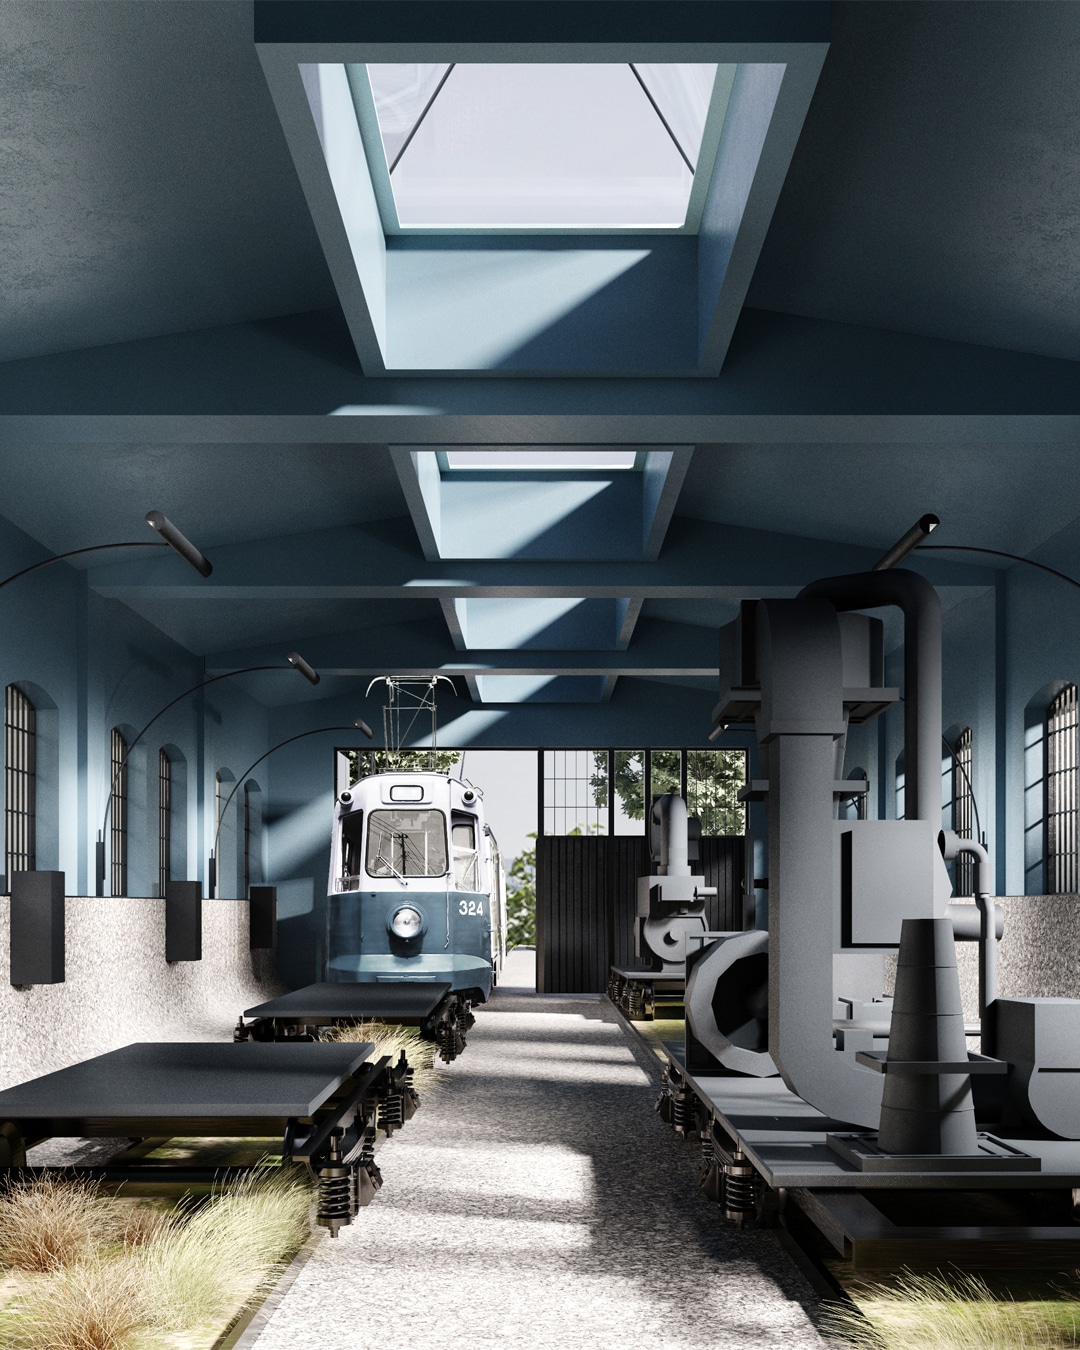 Interior visualization of a steel artisan workshop inside the repurposed tramway station.